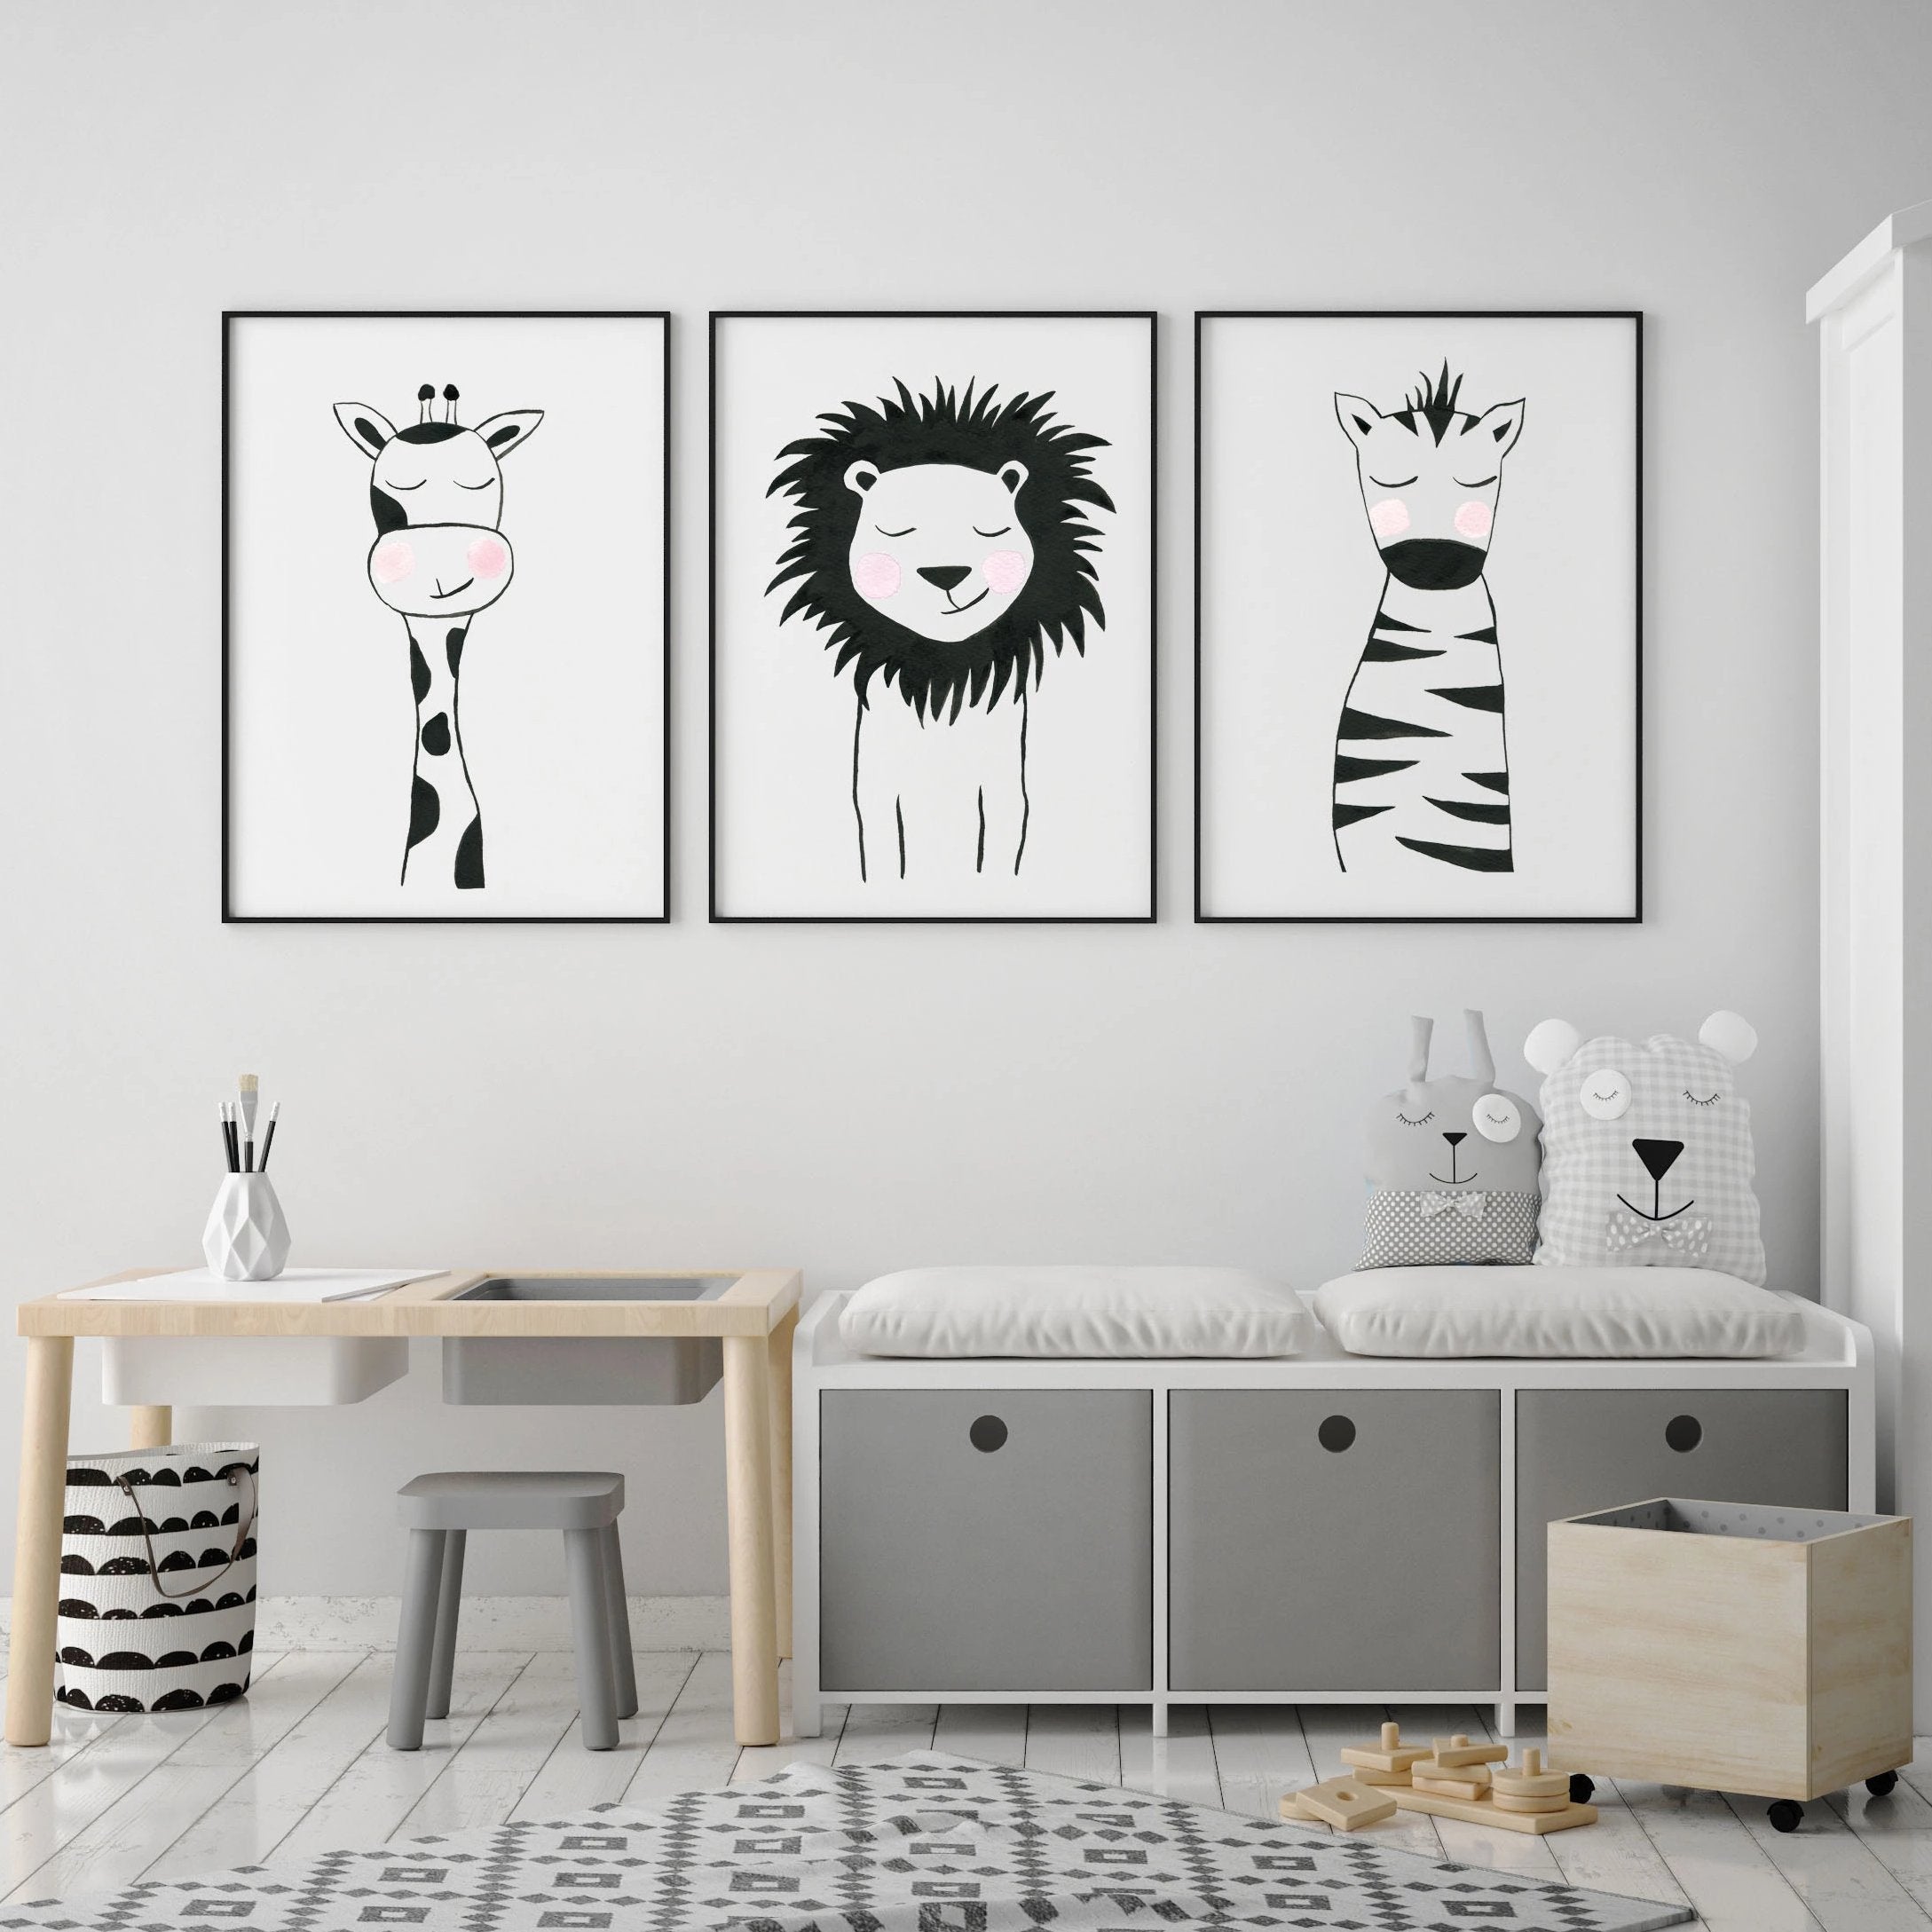 Set of 3 Outer Space Prints - Nursery Wall Art – The Small Art Project -  Modern Nursery Prints